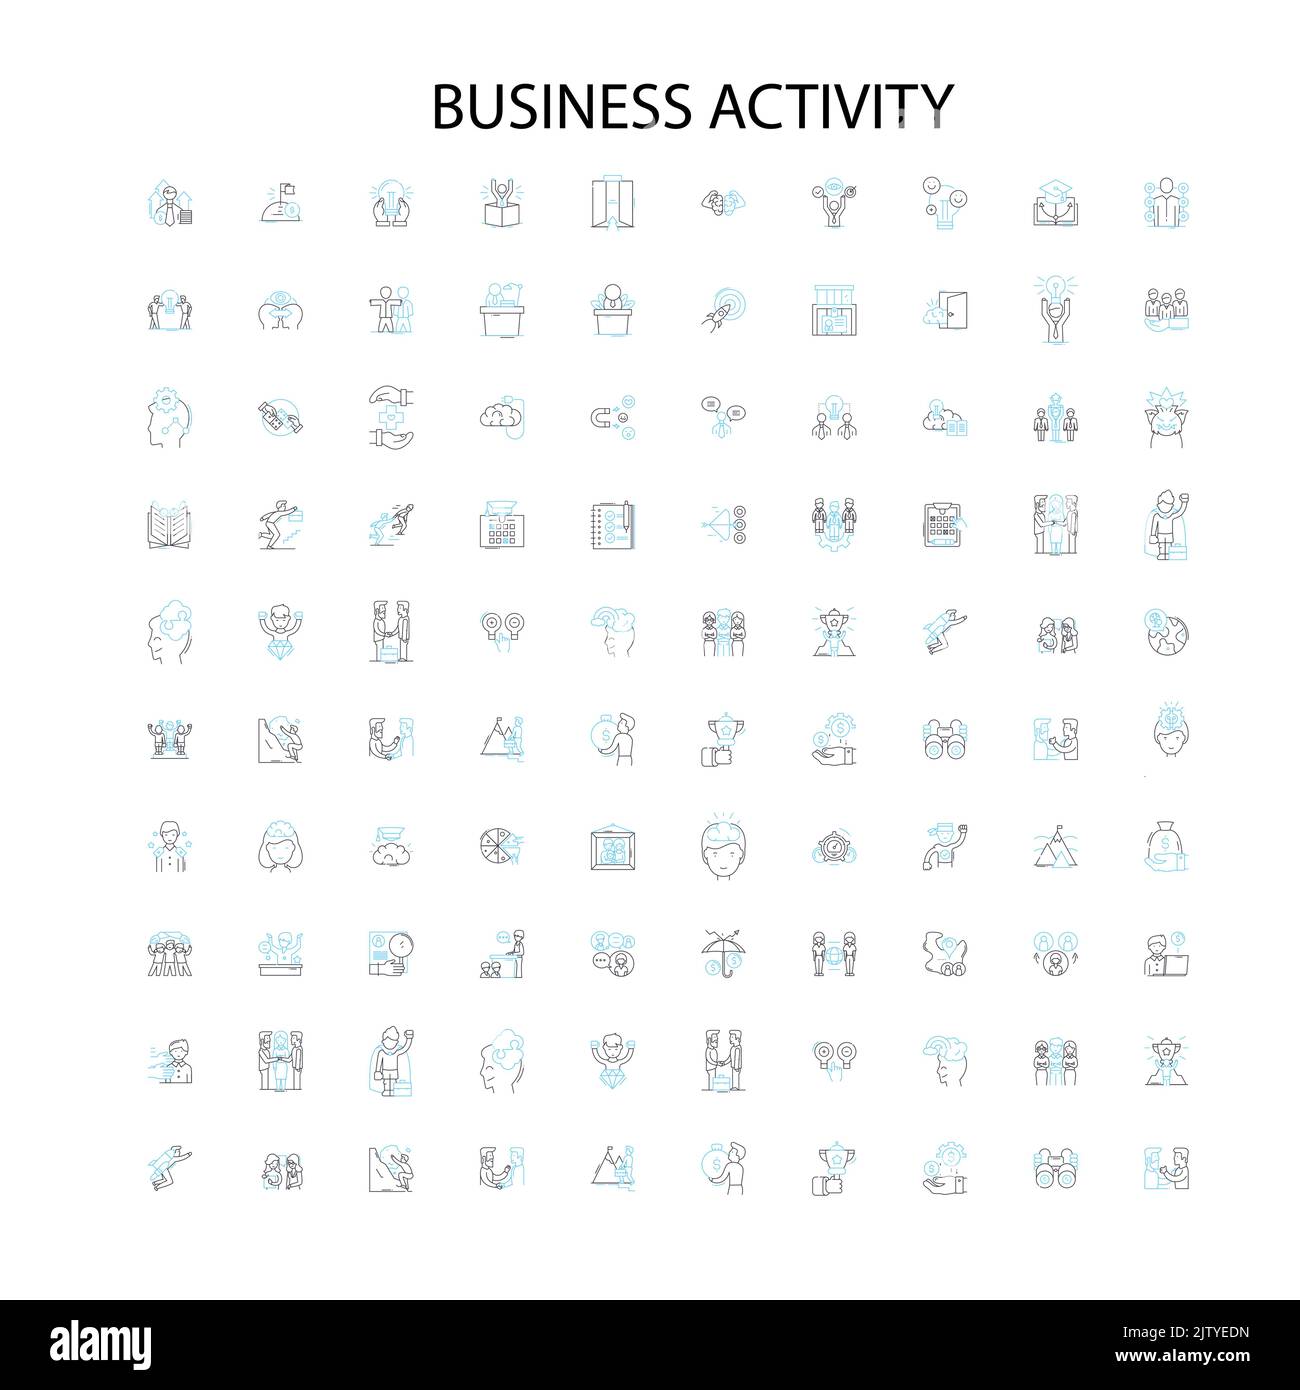 business activity icons, signs, outline symbols, concept linear illustration line collection Stock Vector